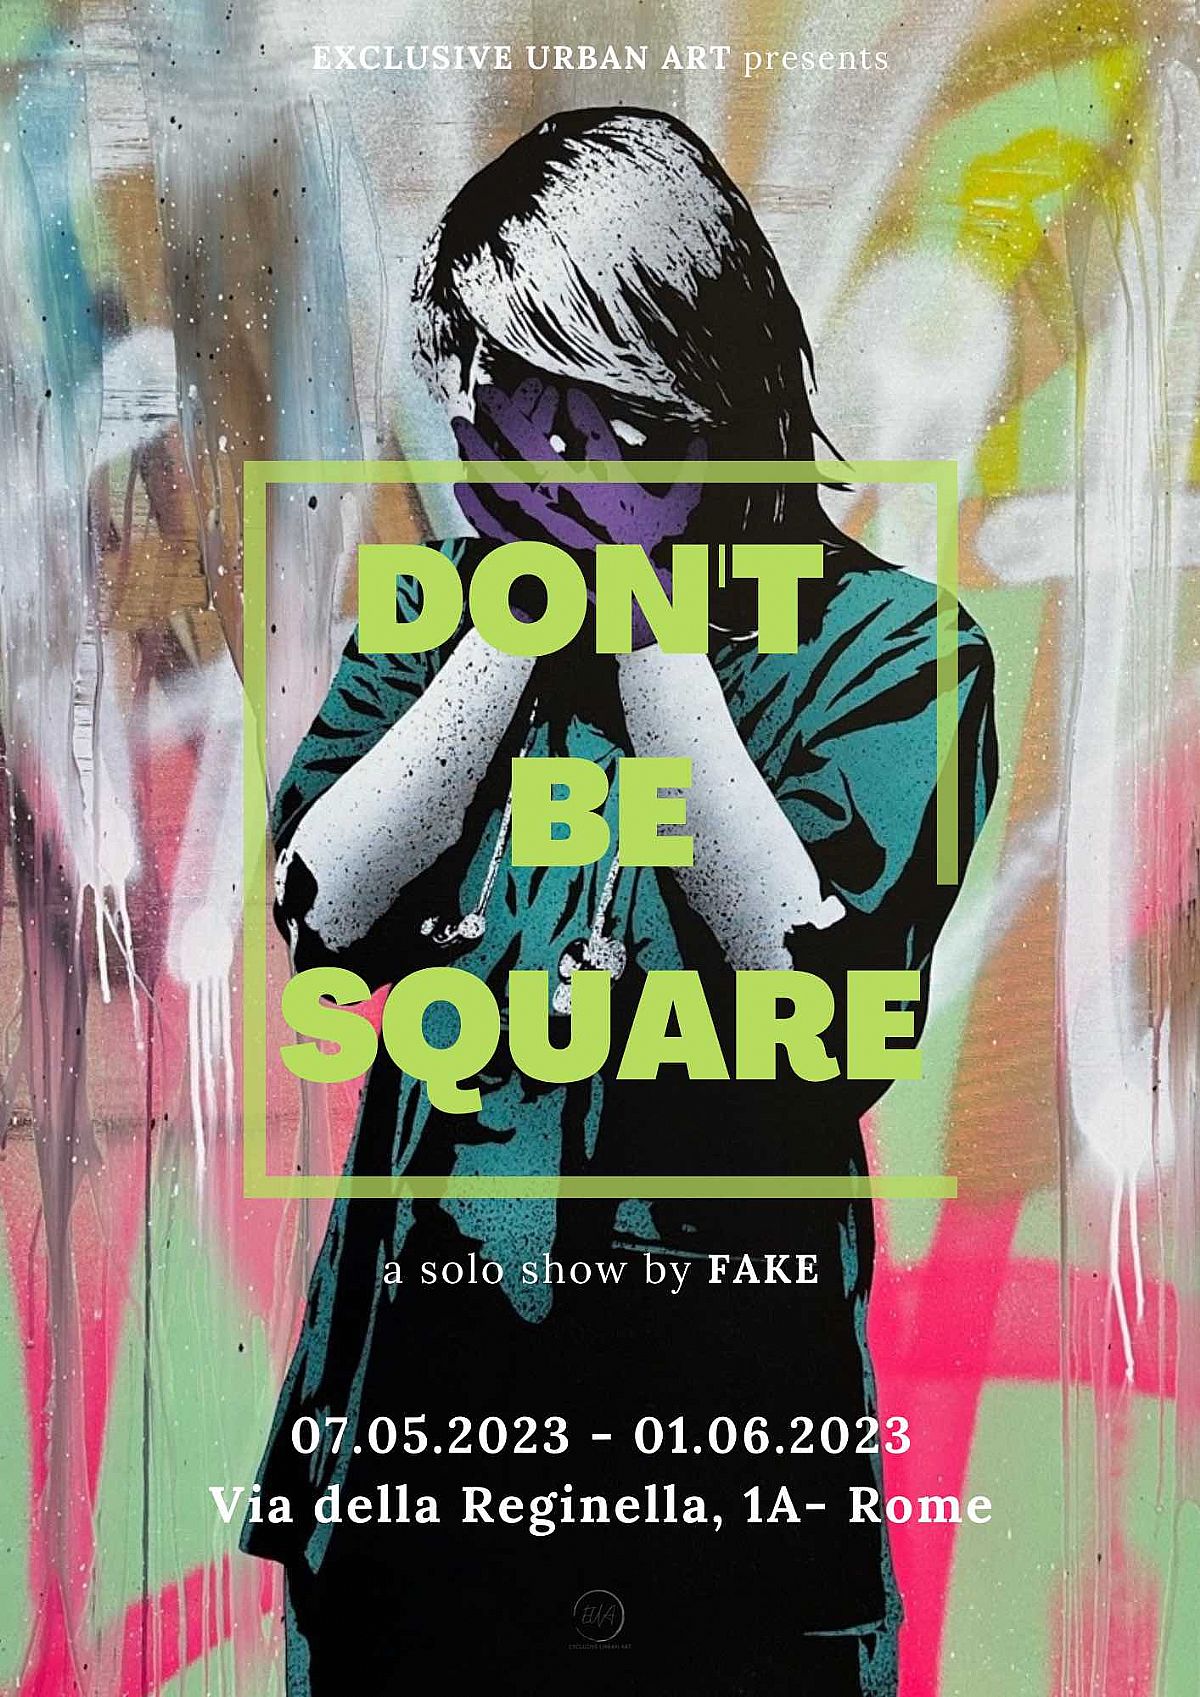 DON'T BE SQUARE